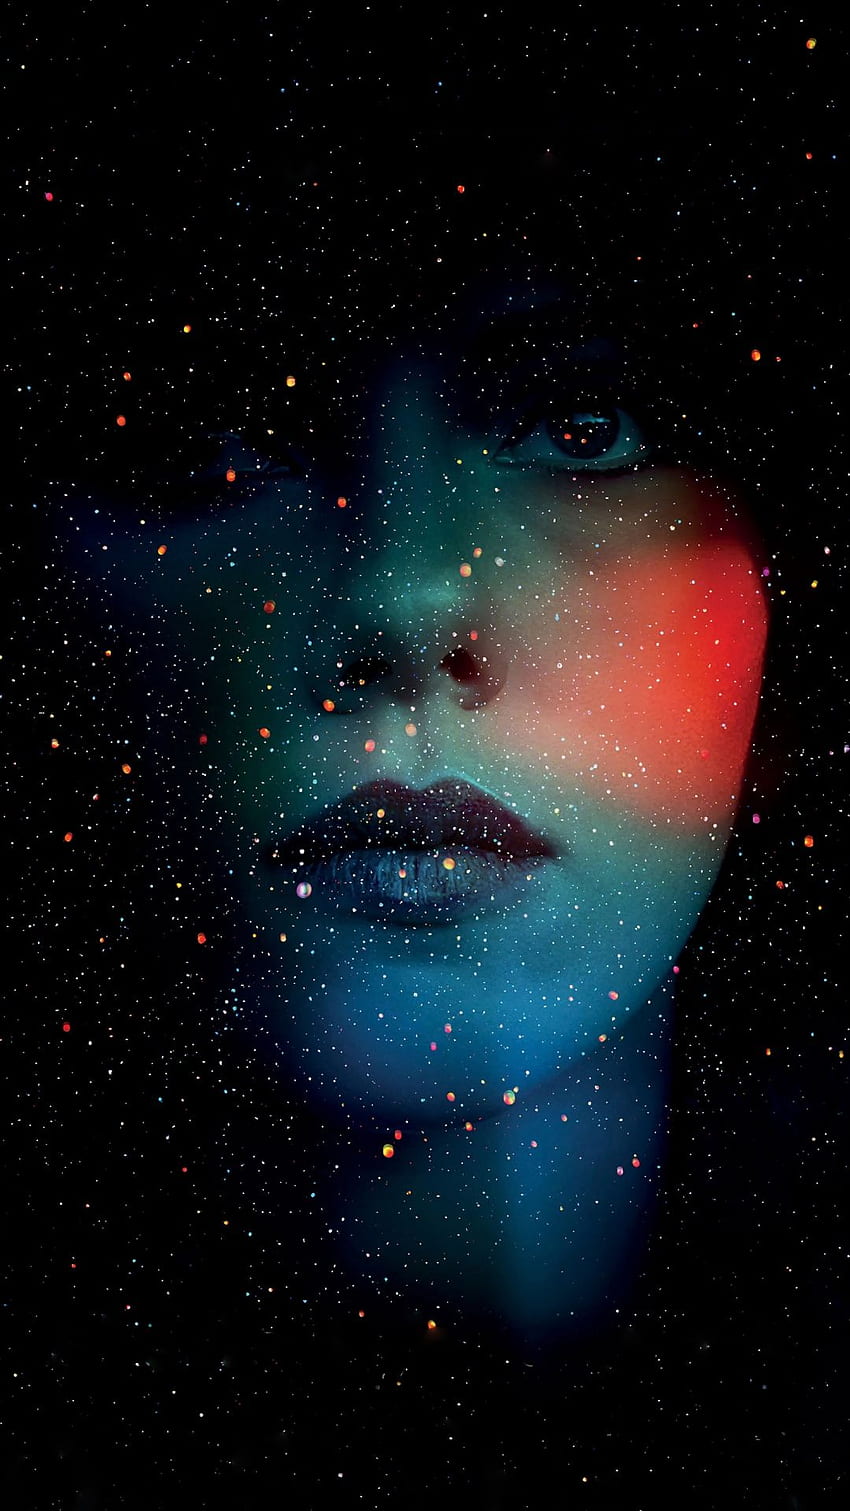 Ƒ↑TAP AND GET THE APP! Space Beautiful Girl's Black Dark Galaxy Shining Stars Amazing Awes. iPhone 6 plus , Under the skin movie, Abstract HD phone wallpaper